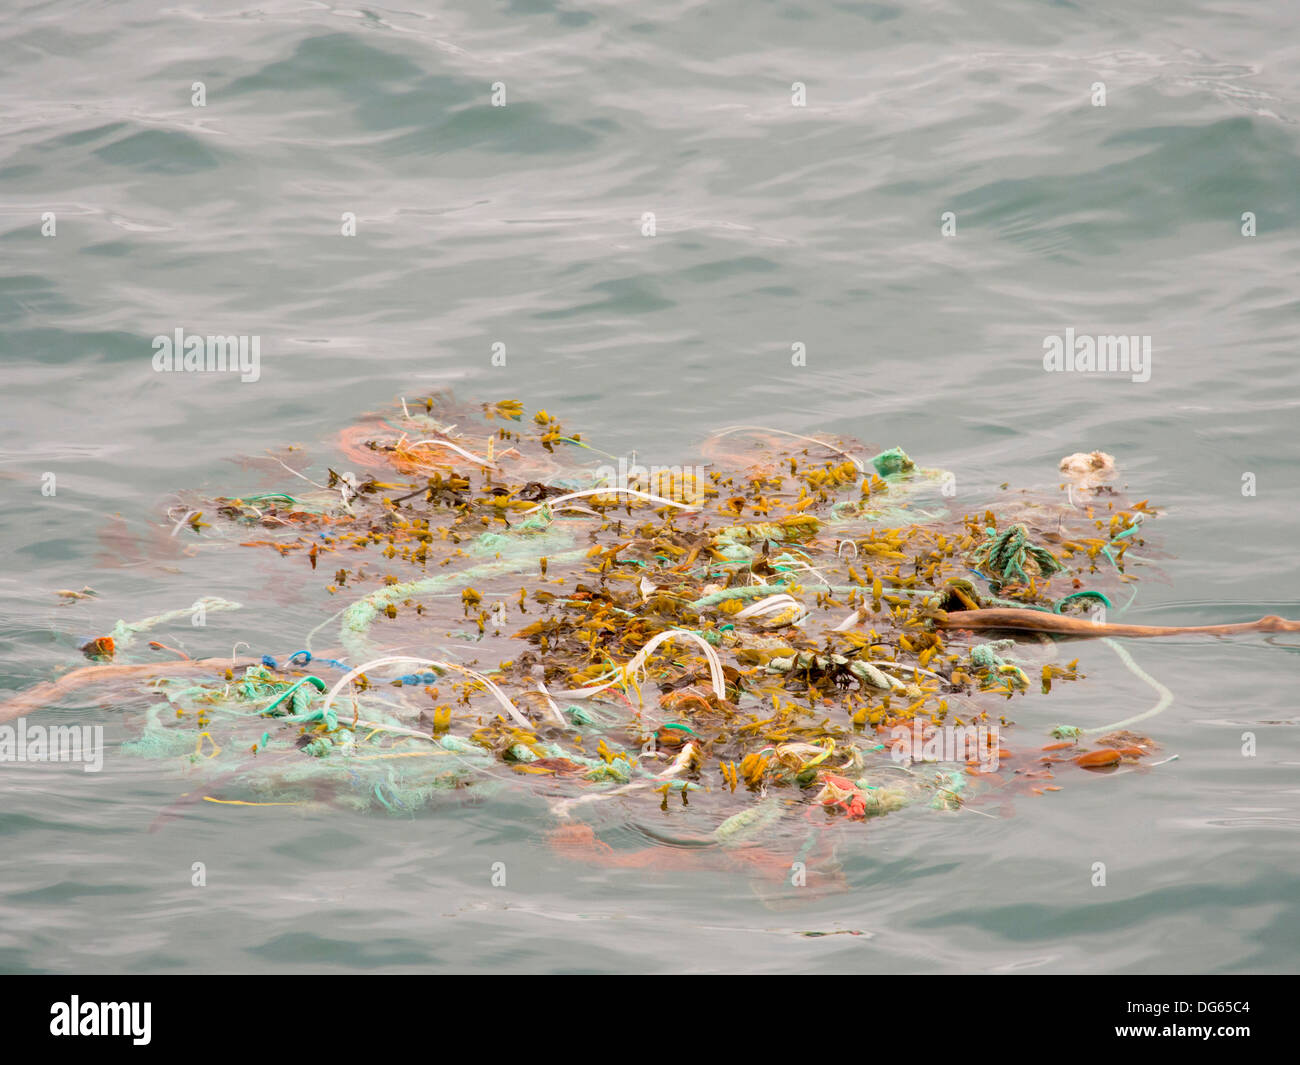 Plastic rubbish floating of a remote beach in Northern Svalbard, only about 600 miles from the North Pole. Stock Photo